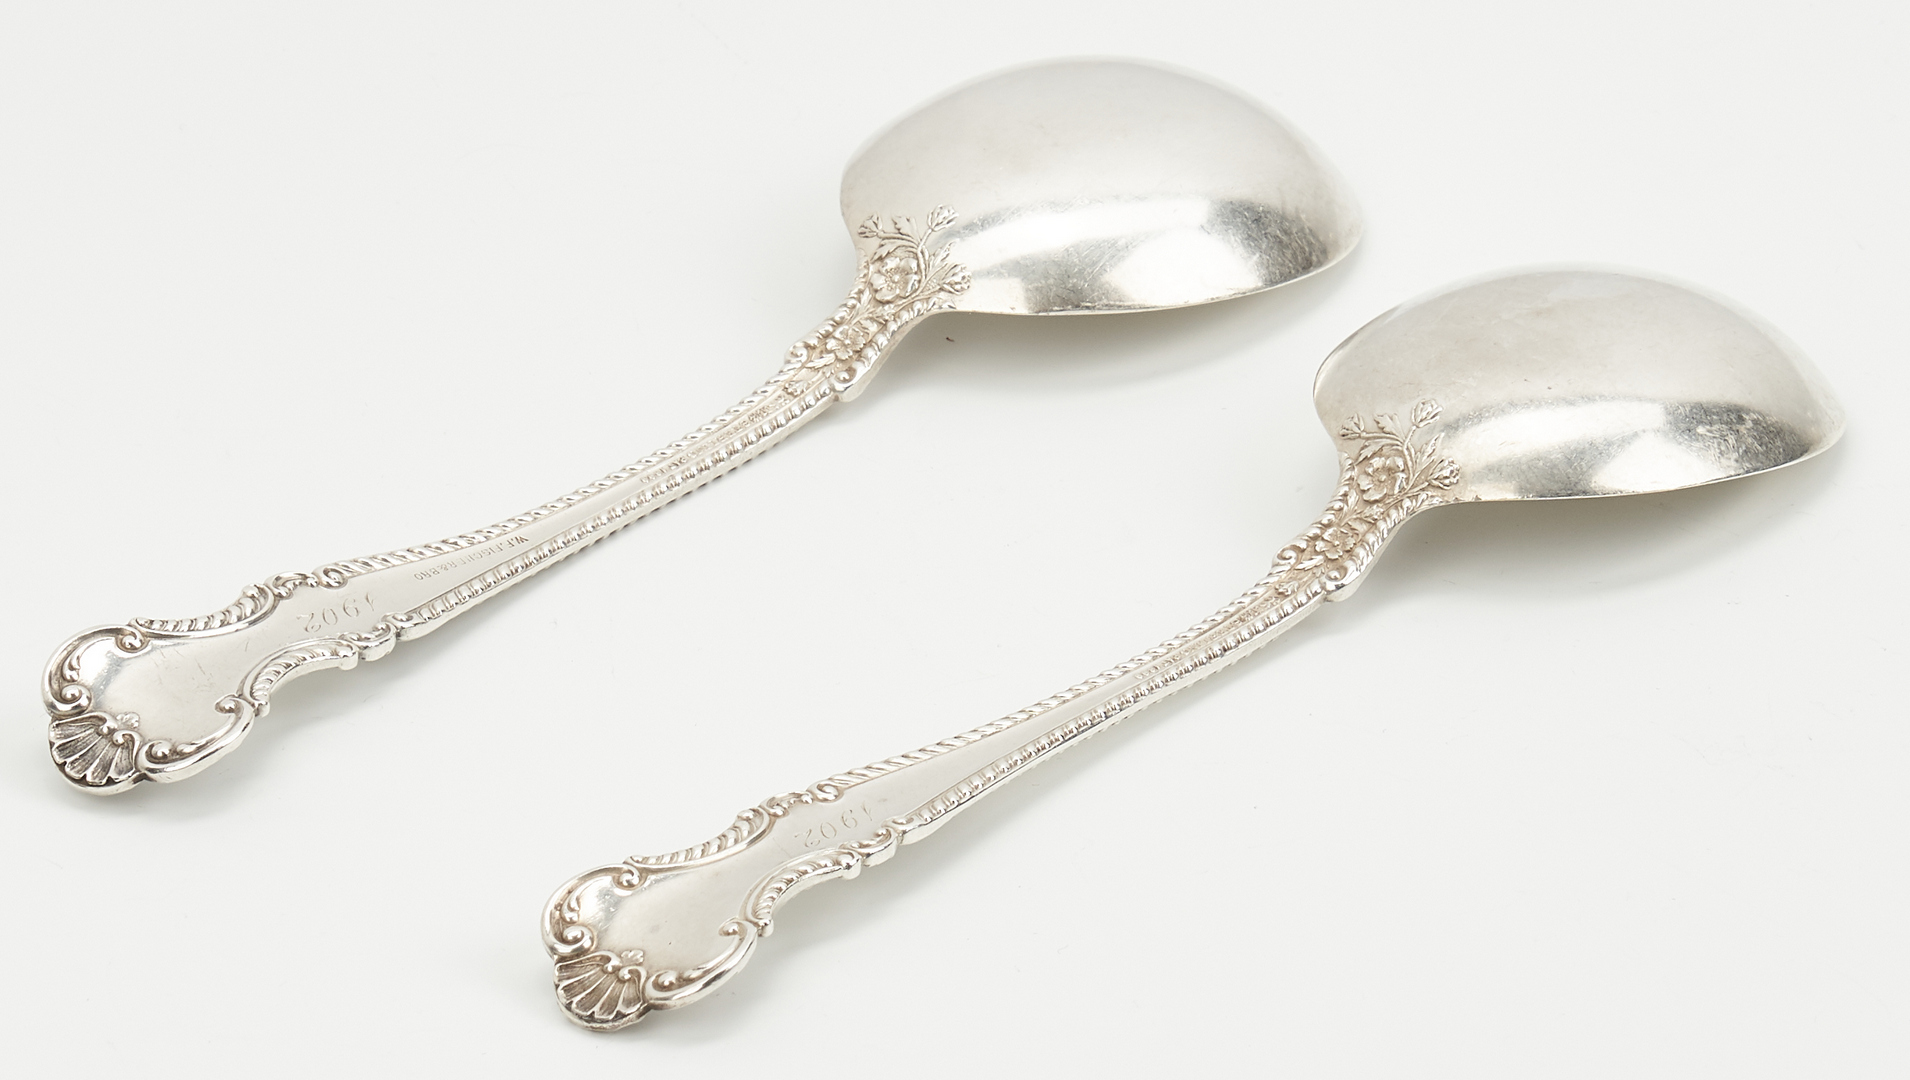 ALVIN PRINCE EUGENE STERLING SILVER CREAM SOUP SPOON VERY GOOD CONDITION 